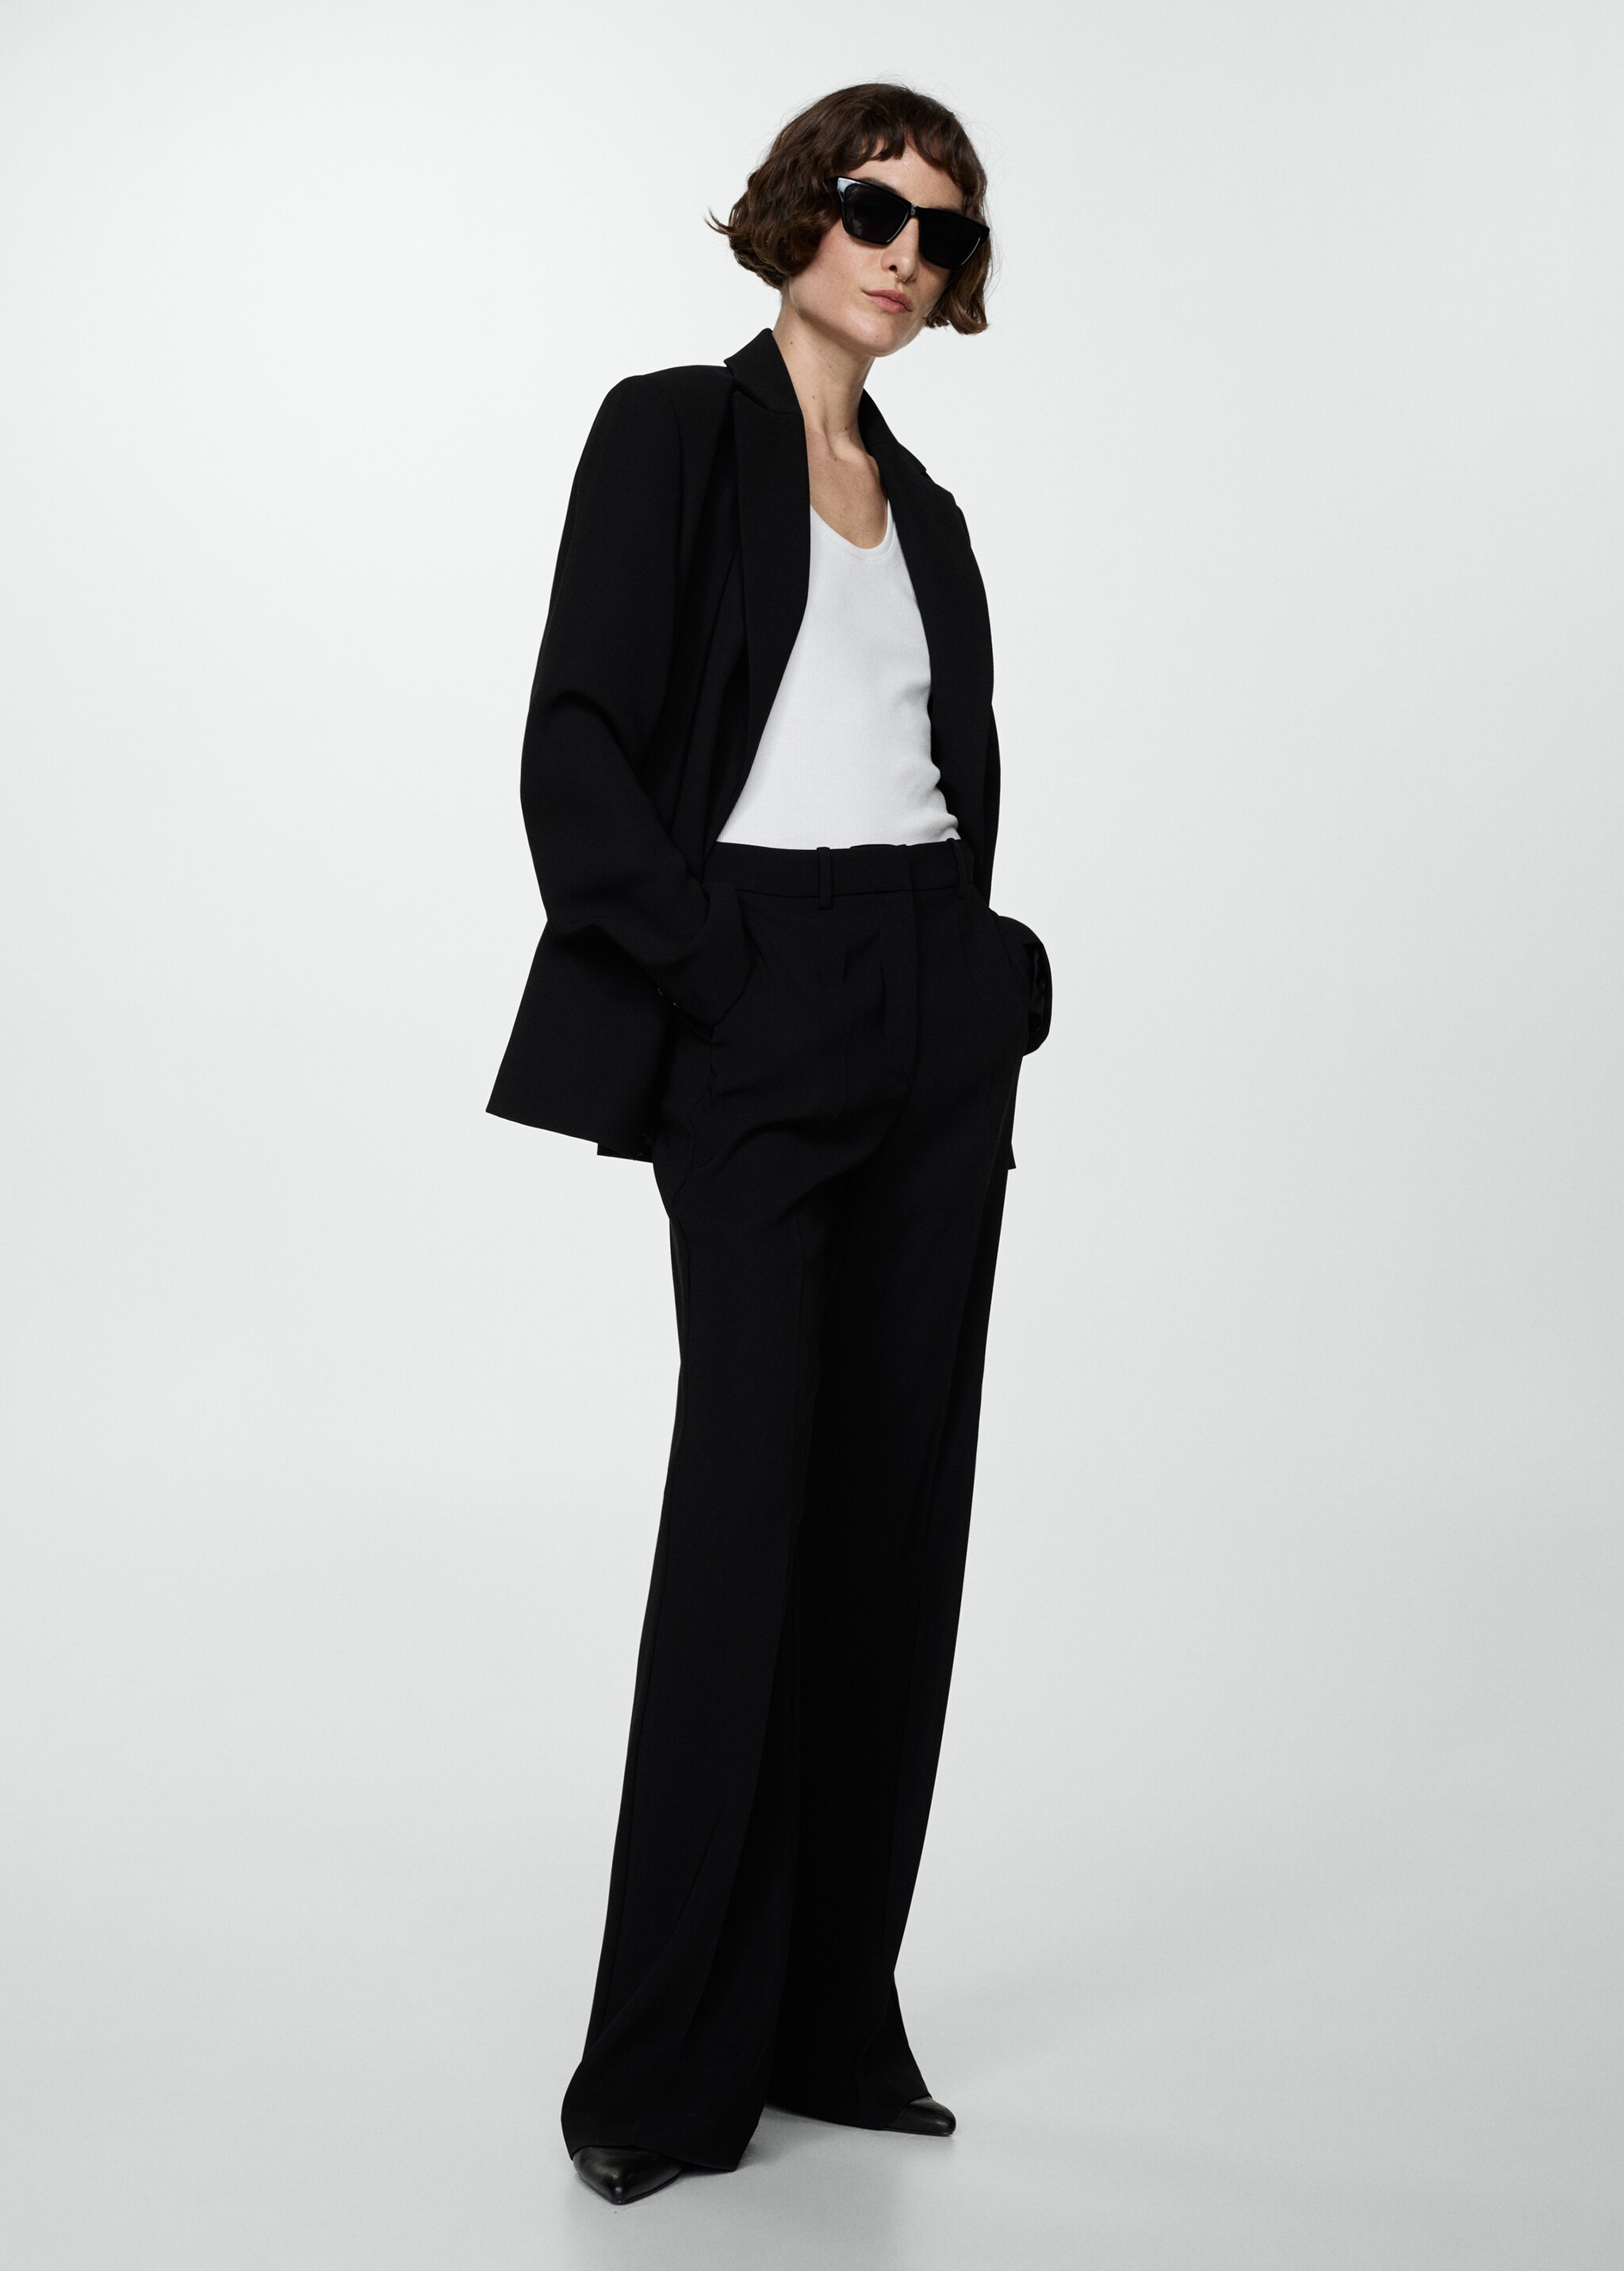 Flared trouser suit - General plane